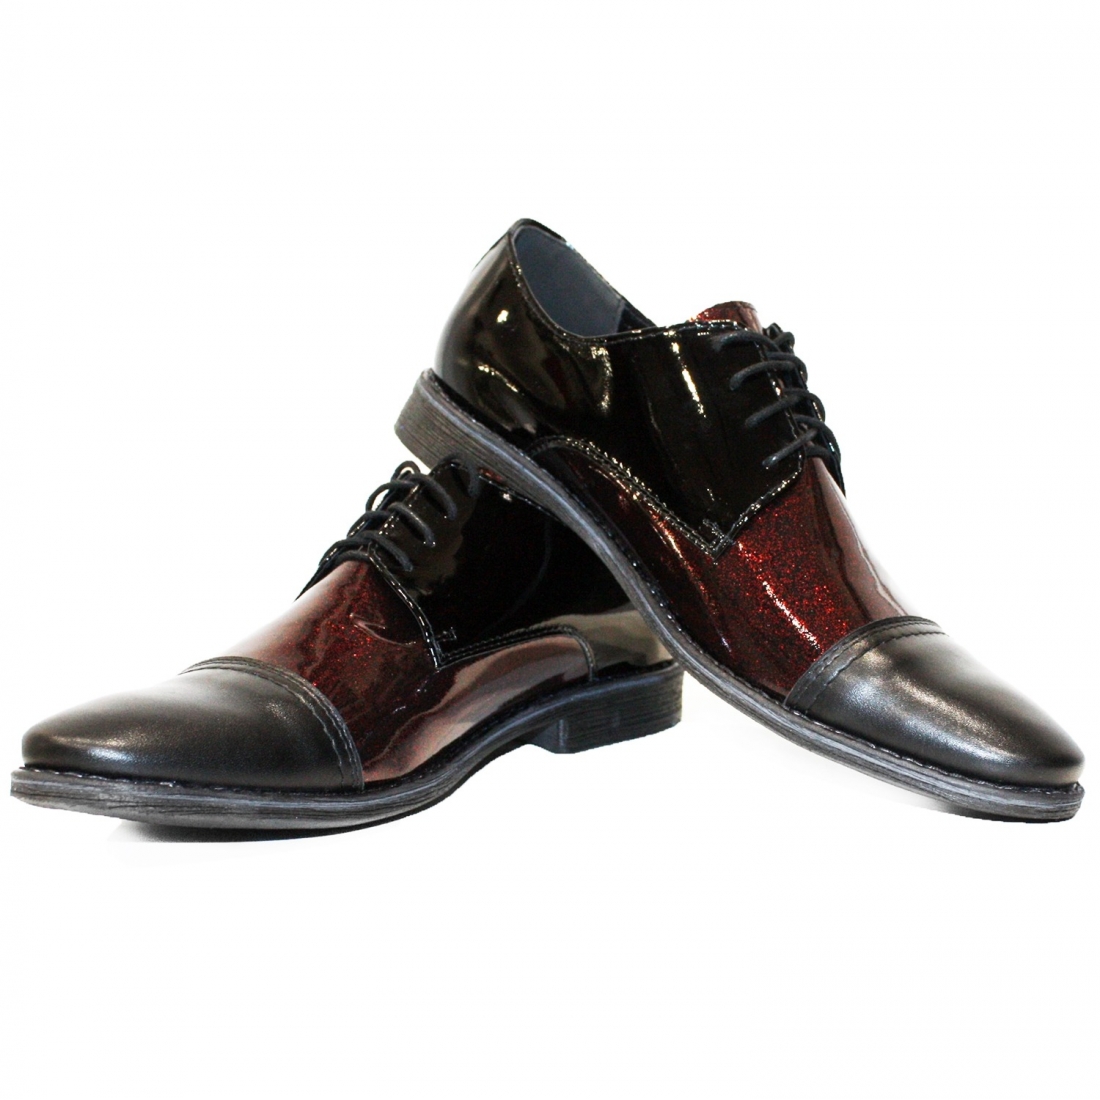 Modello Rollero - Classic Shoes - Handmade Colorful Italian Leather Shoes